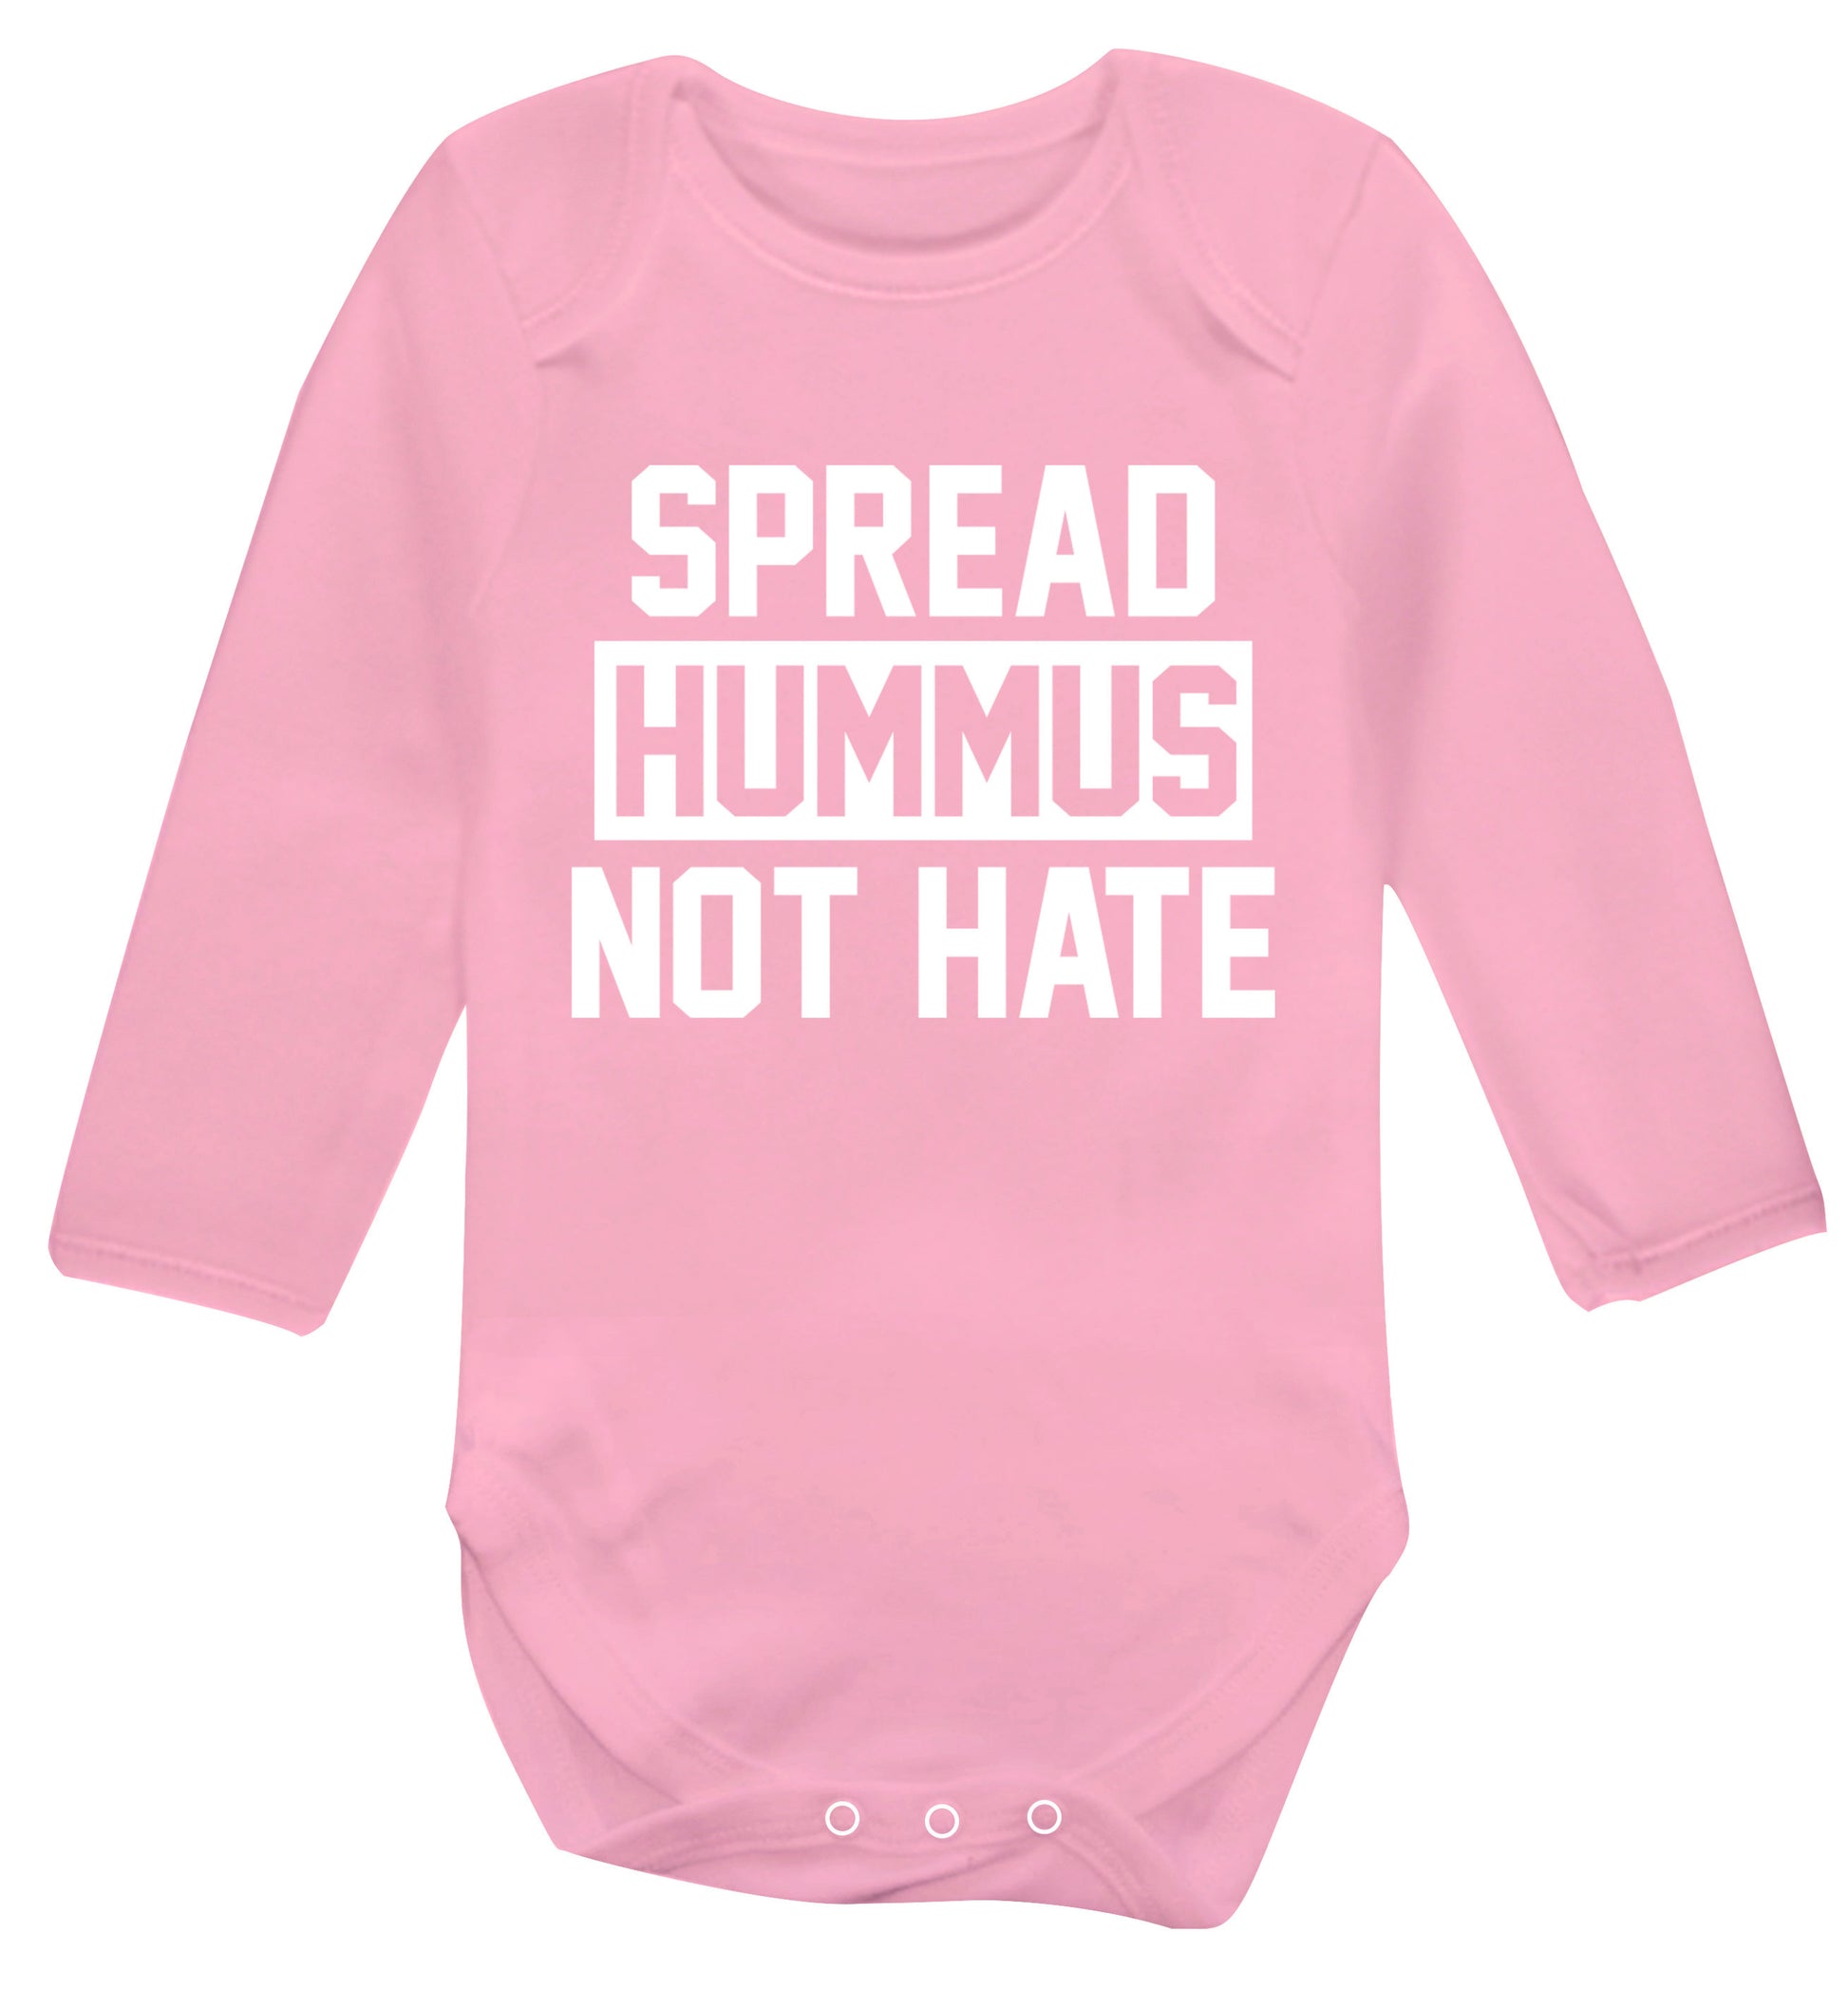 Spread hummus not hate Baby Vest long sleeved pale pink 6-12 months